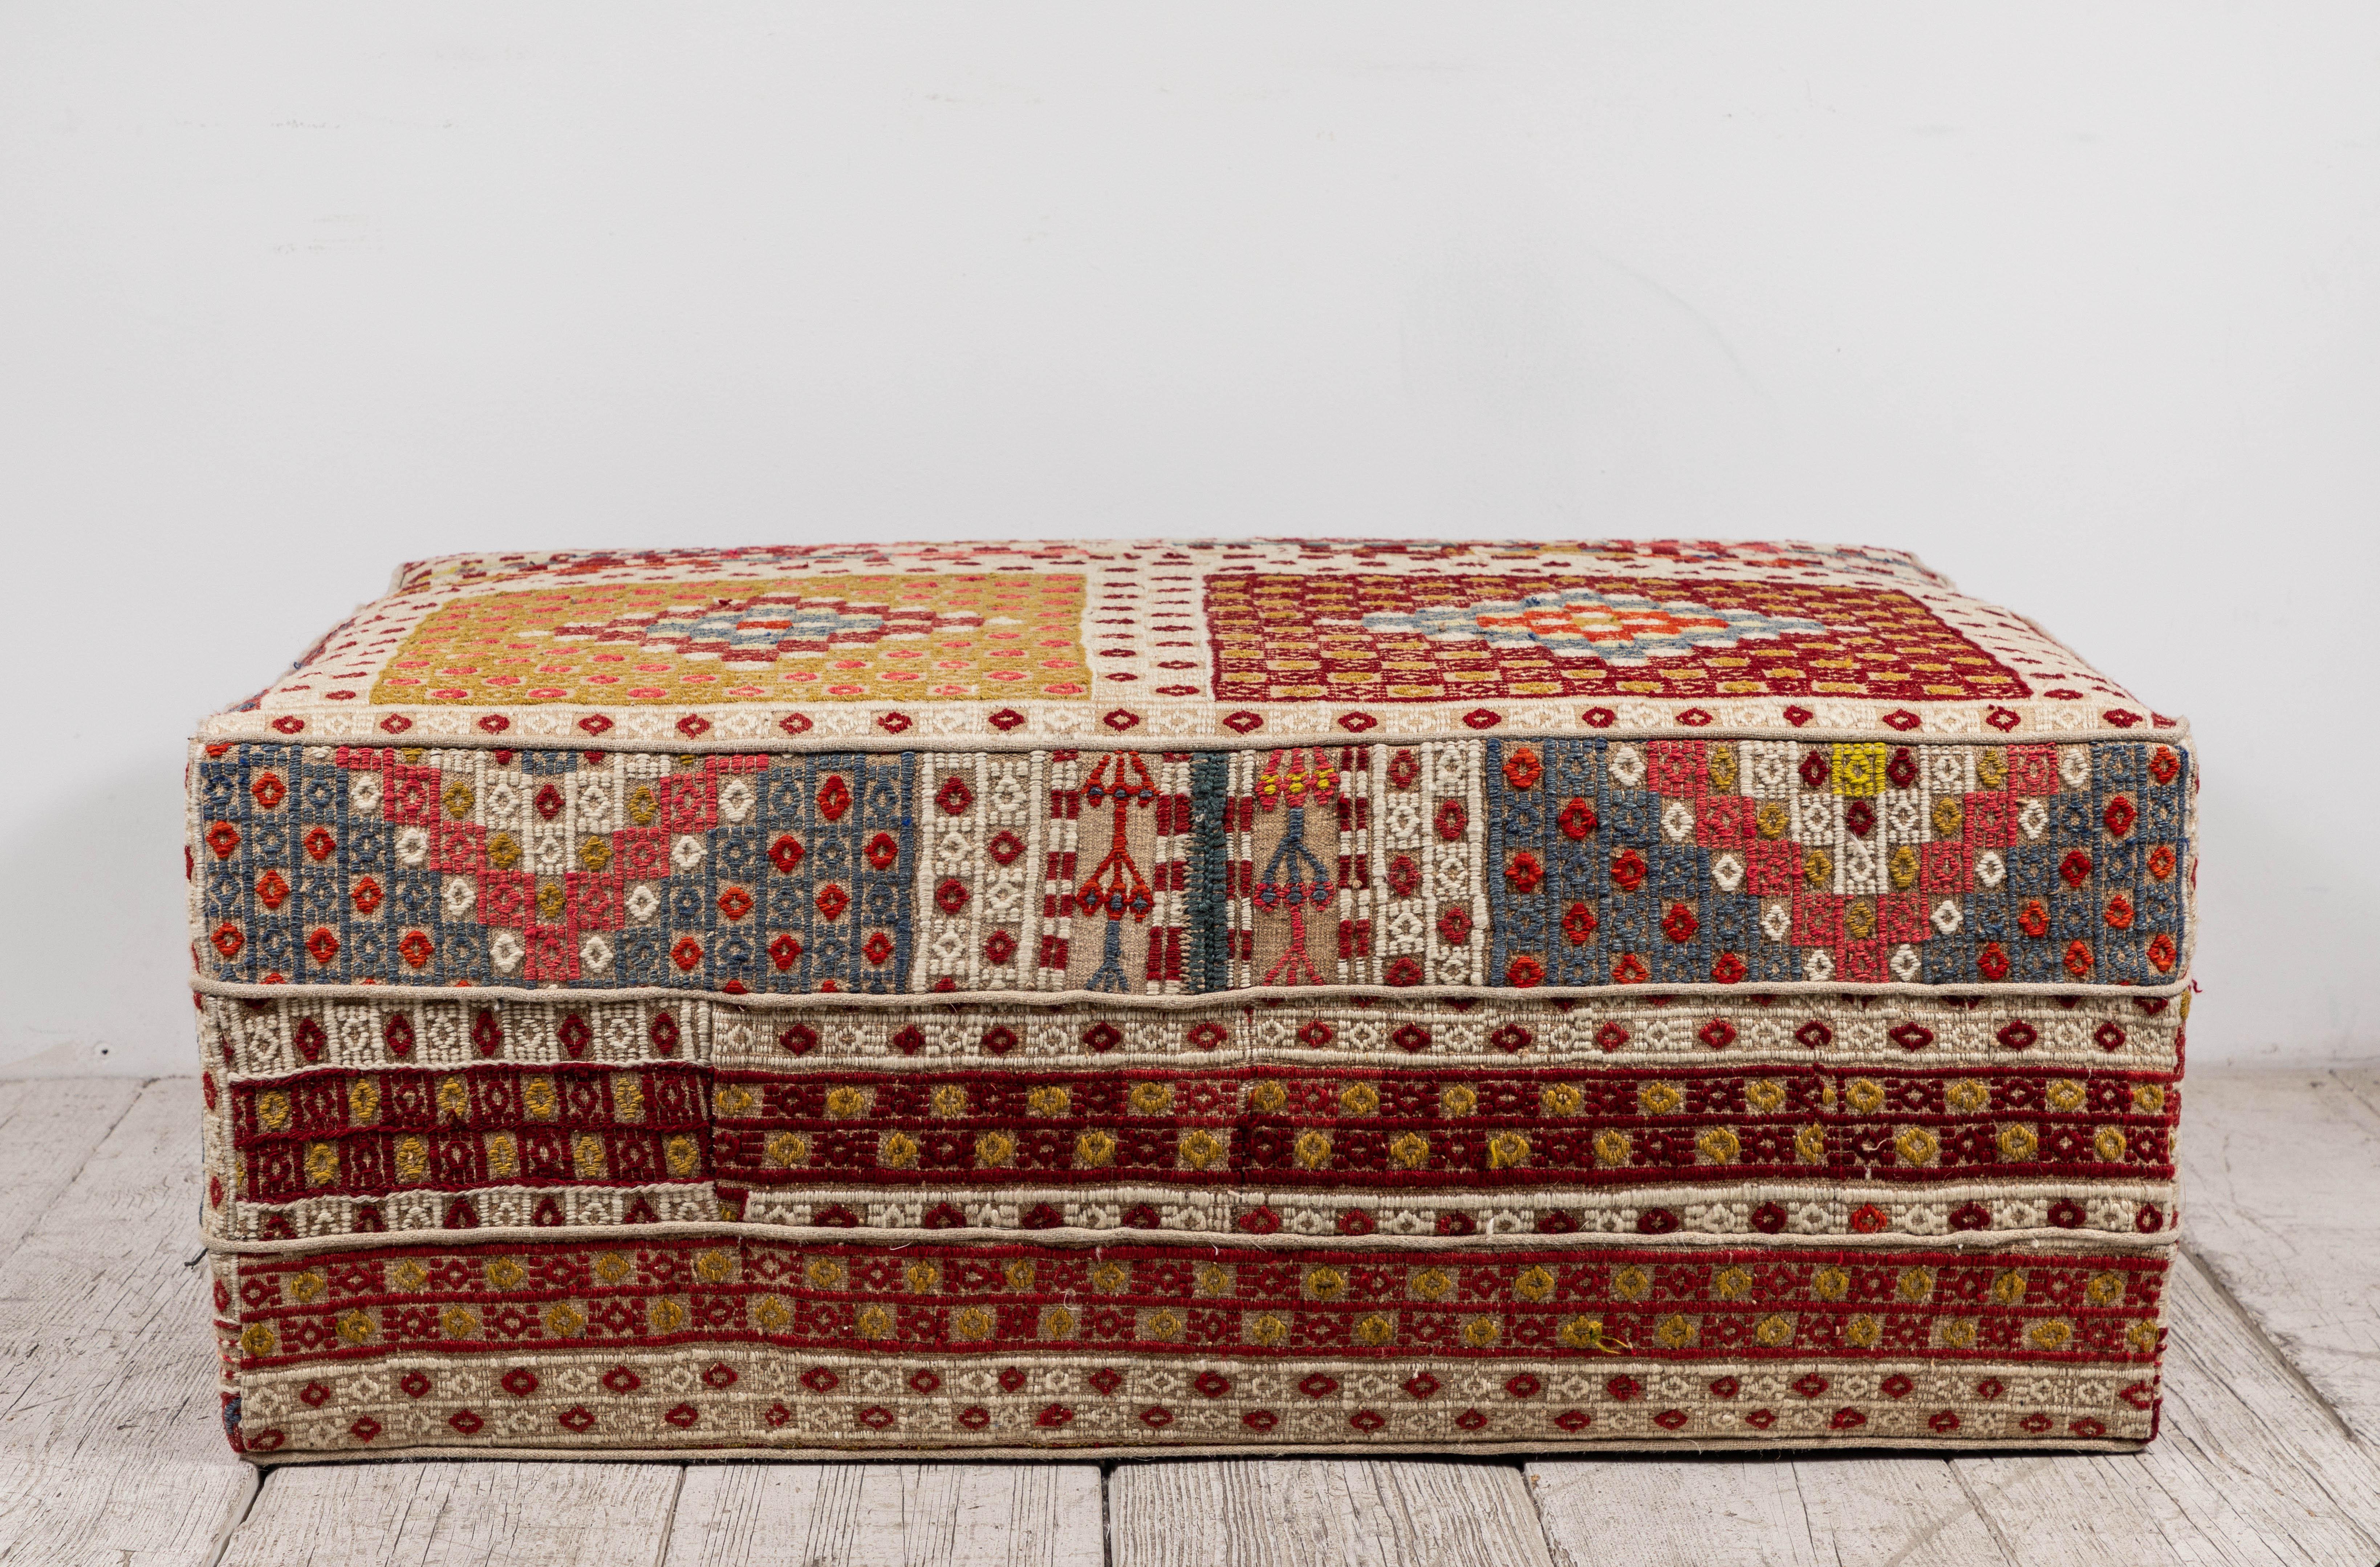 Rectangular Ottoman upholstered in a colorful vintage Turkish rug.